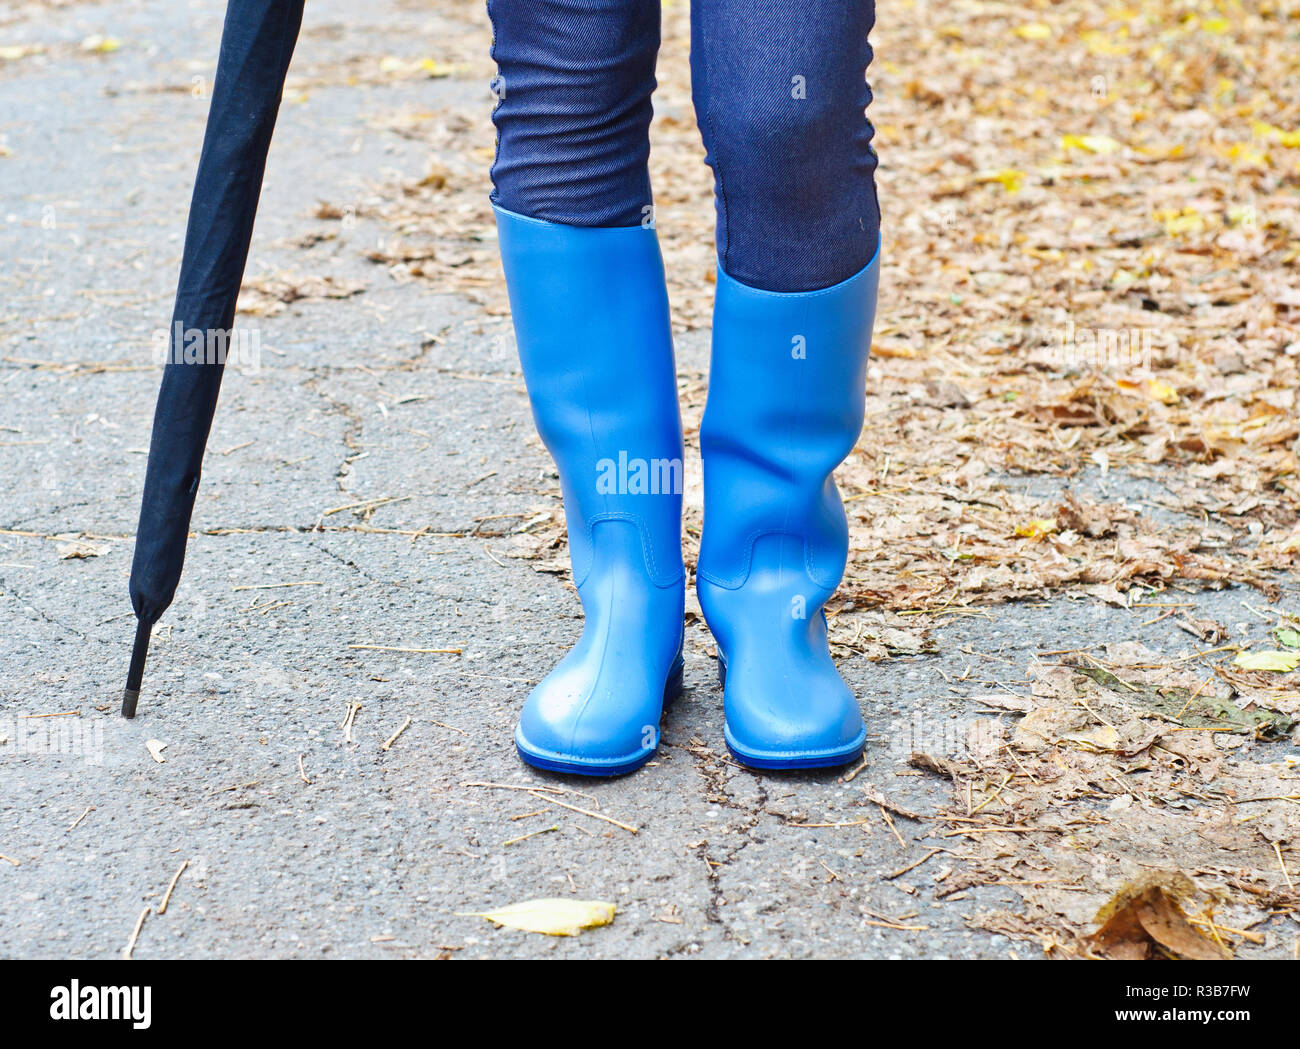 Safety Rubber Boots High Resolution Stock Photography and Images - Alamy